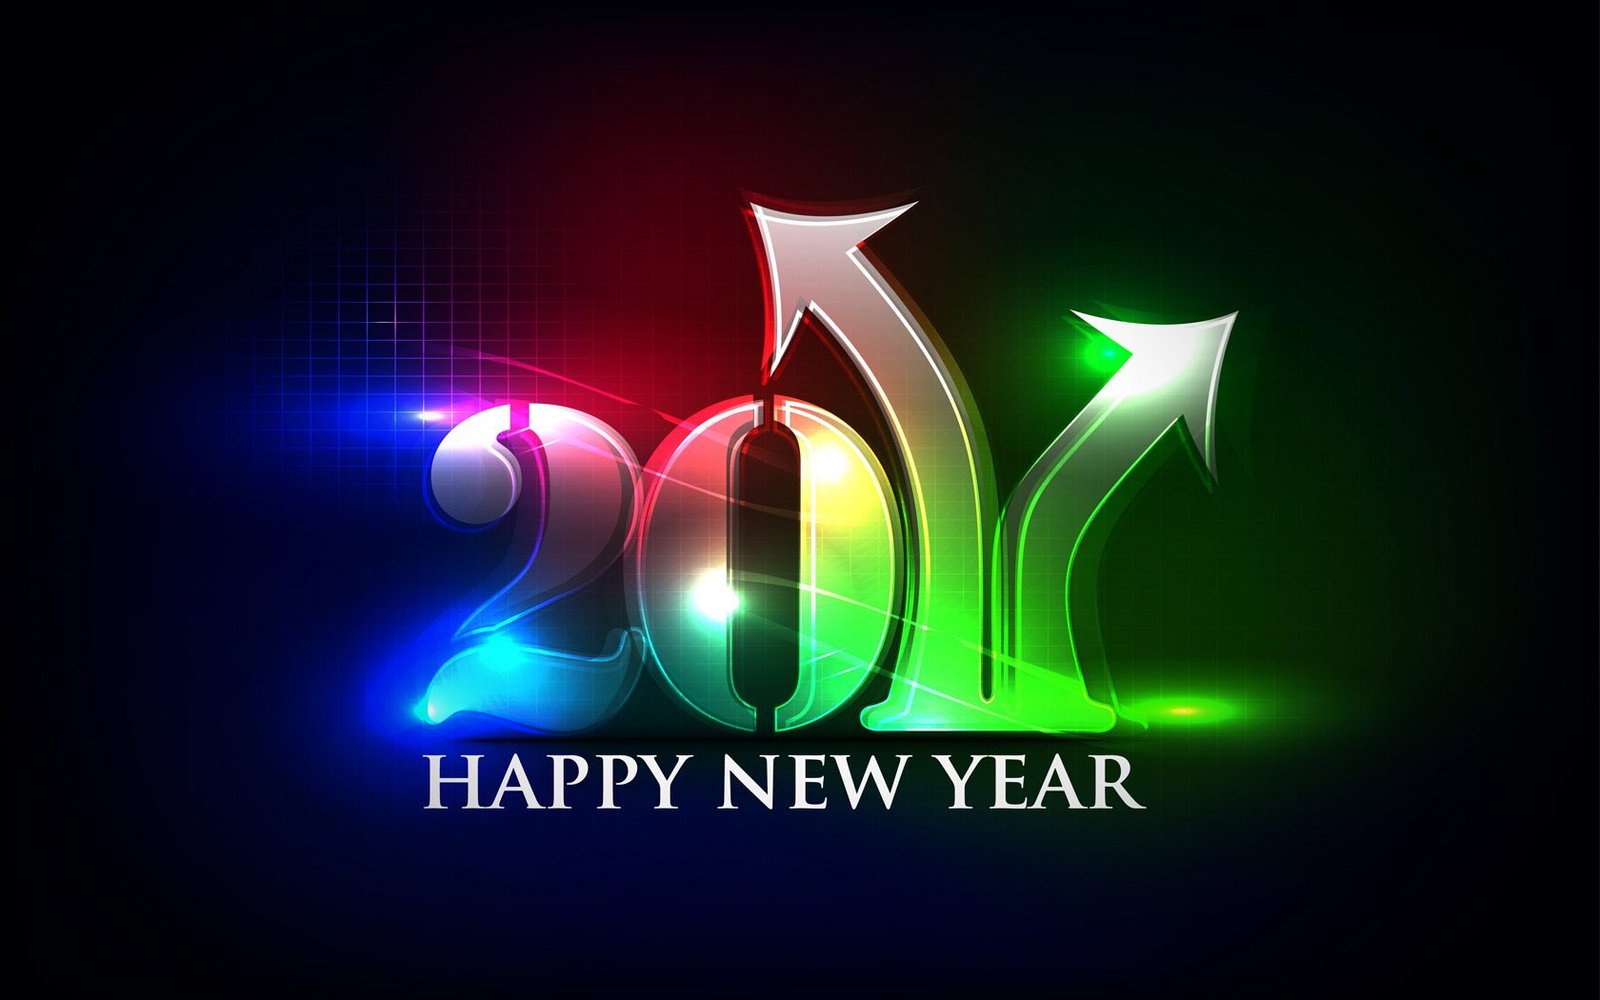 New Year 2011 wallpapers 9